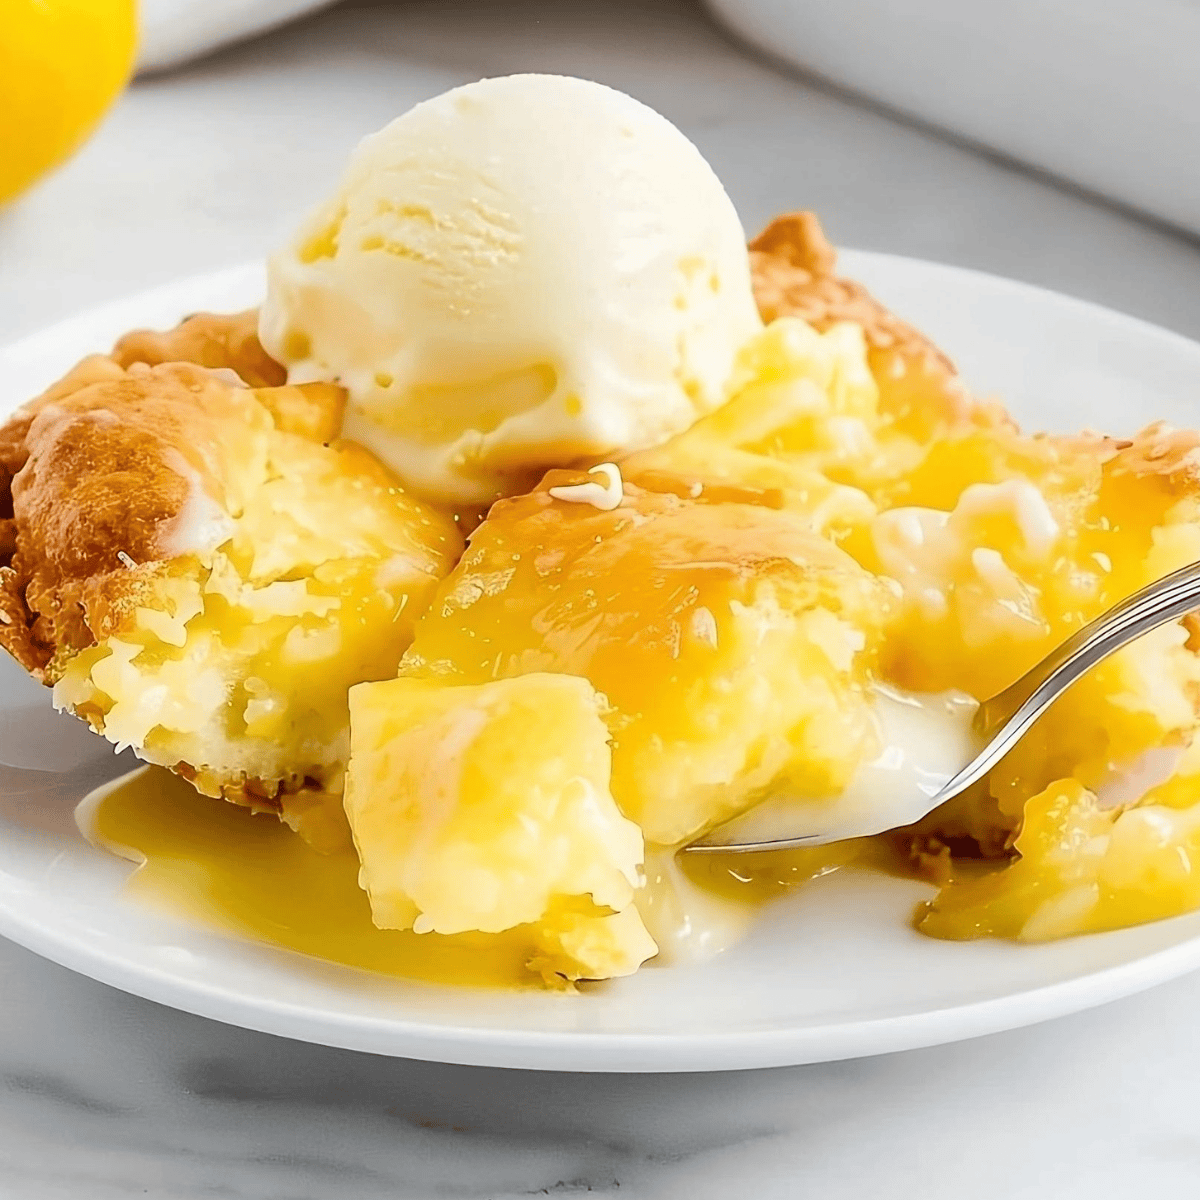 Serving of lemon cobbler in a white plate with a scoop of vanilla ice cream.